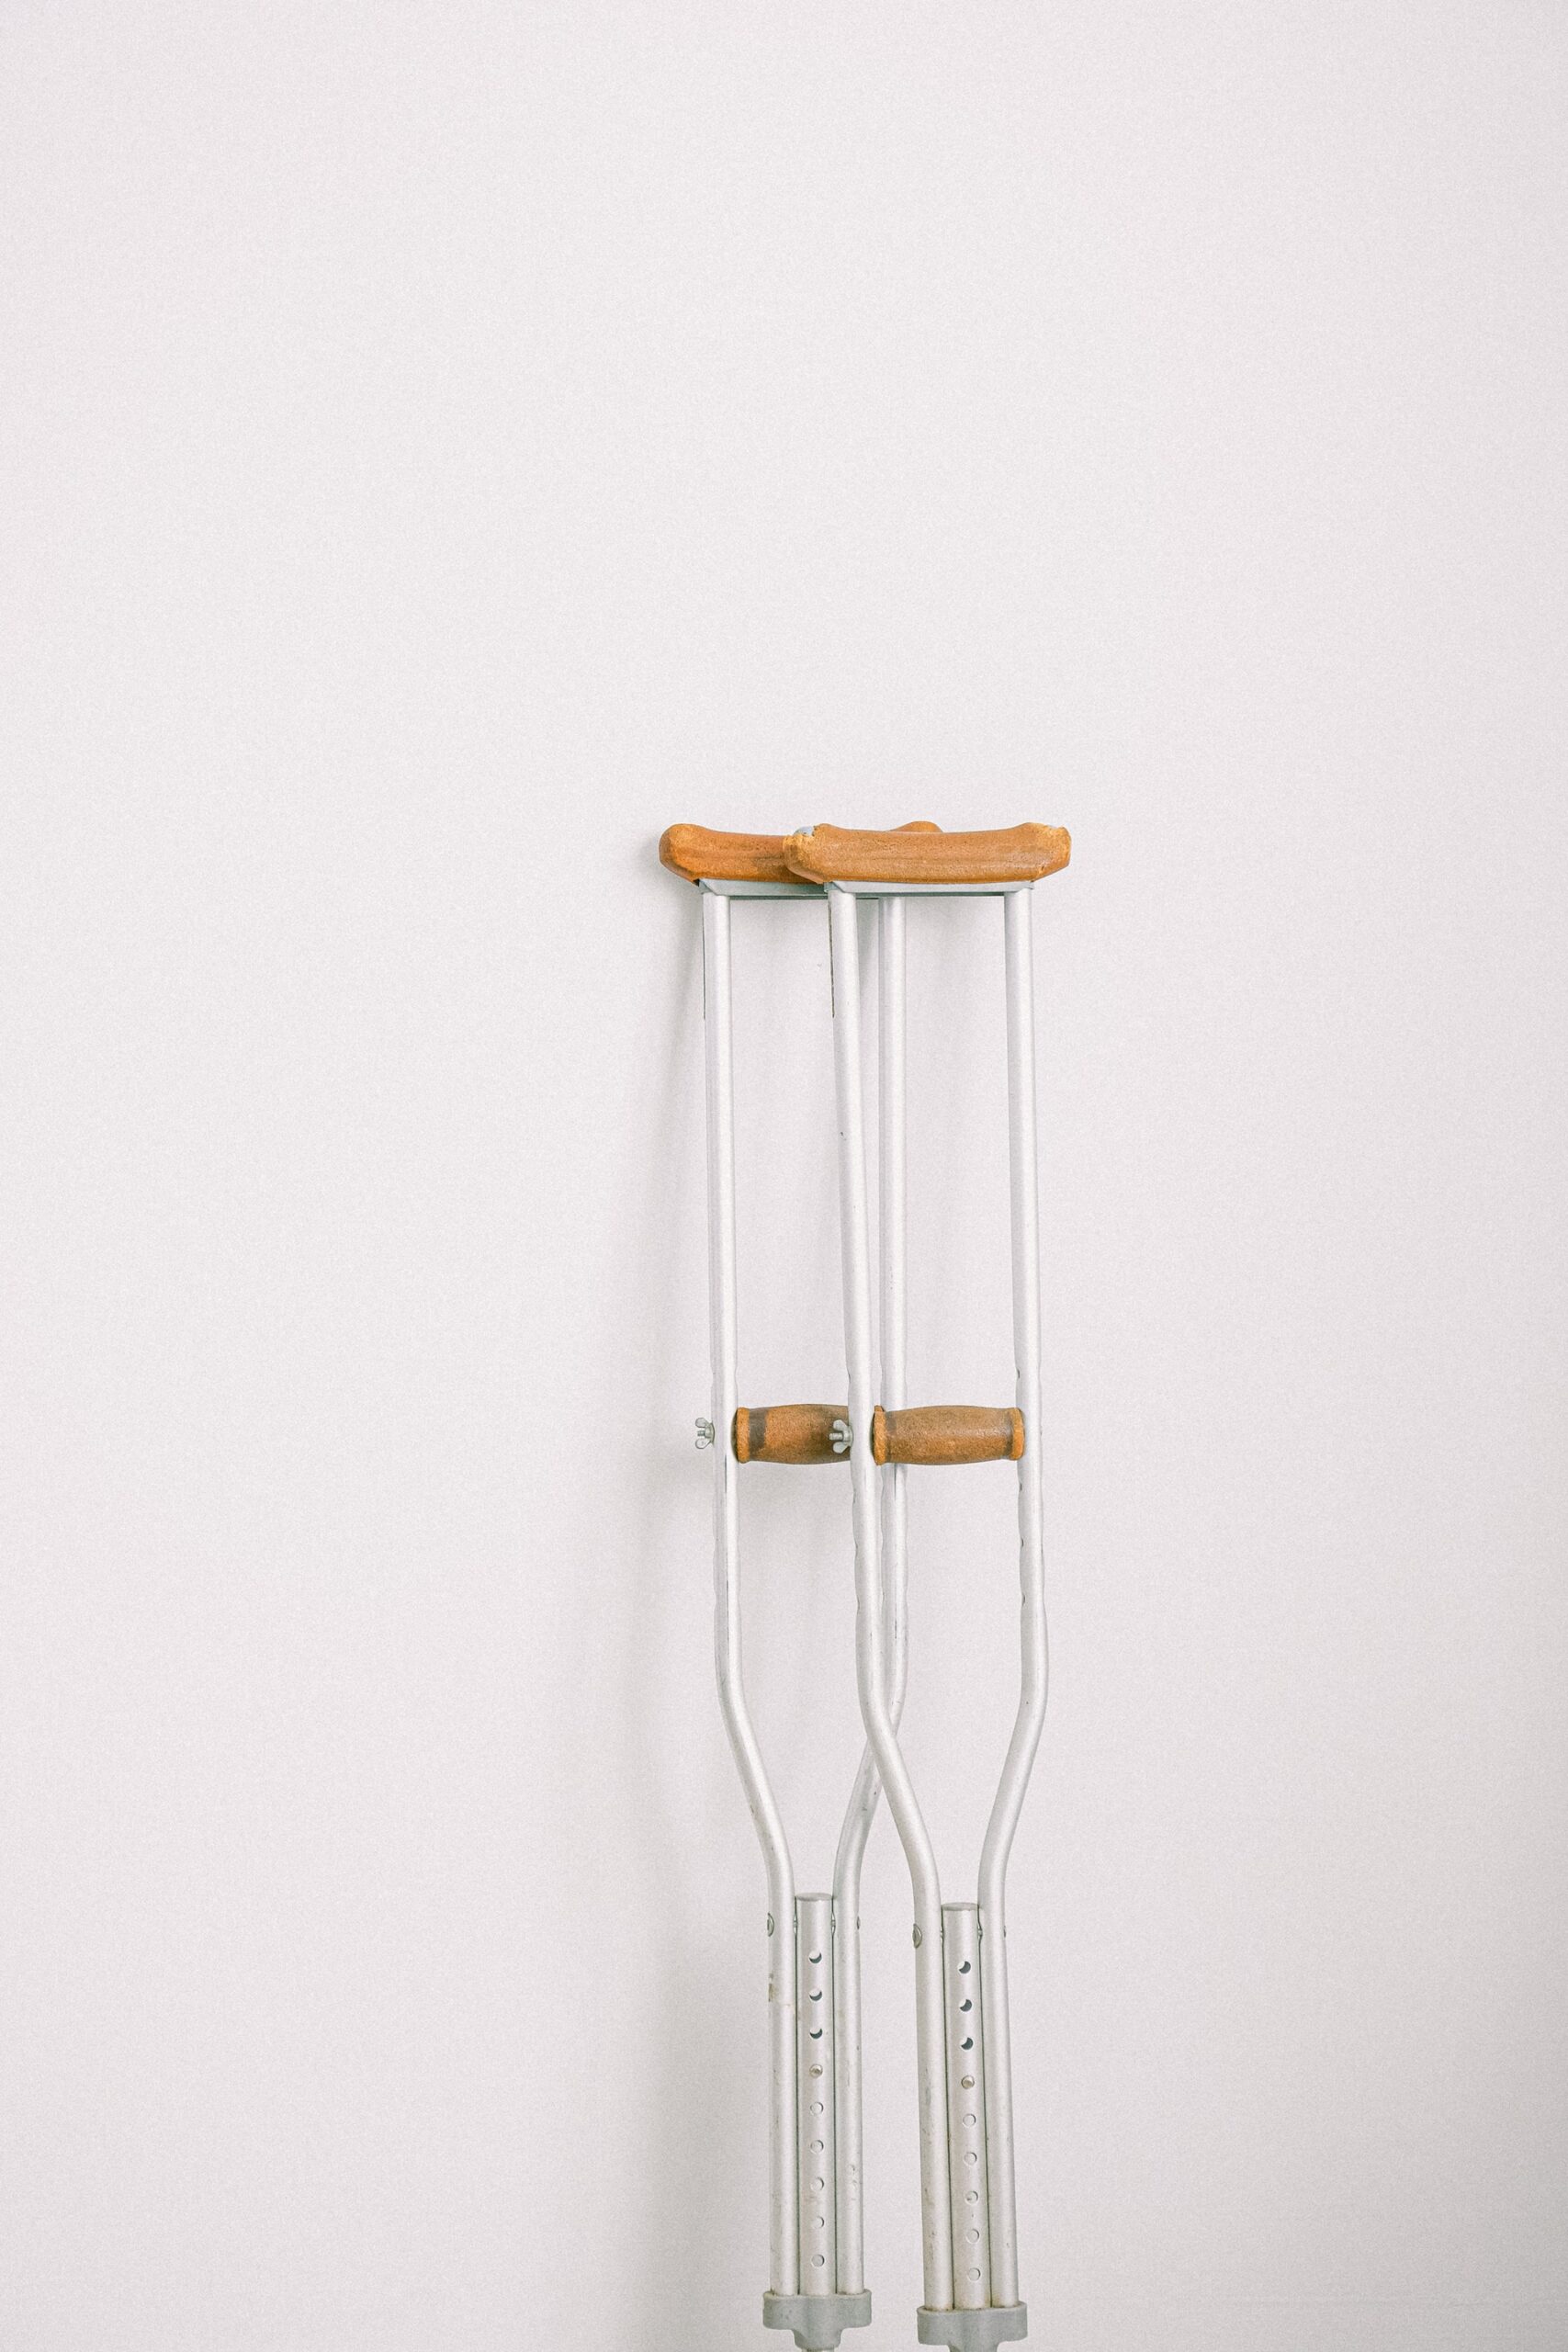 A pair of metal crutches with wooden handles against a white wall.